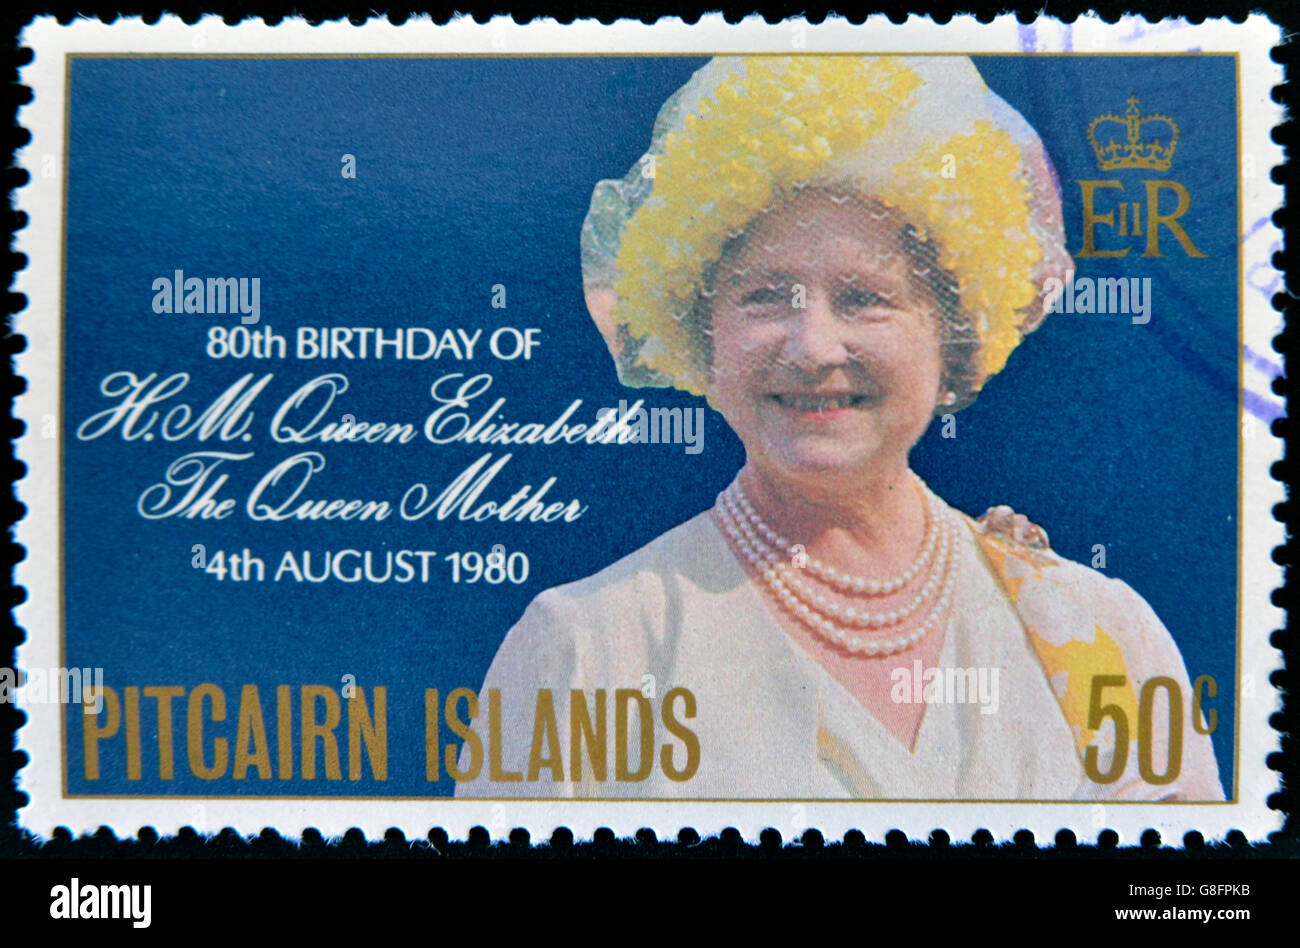 PITCAIRN ISLANDS - CIRCA1980: A stamp printed in Pitcairn islands shows a portrait of the Queen Mother, circa 1980 Stock Photo